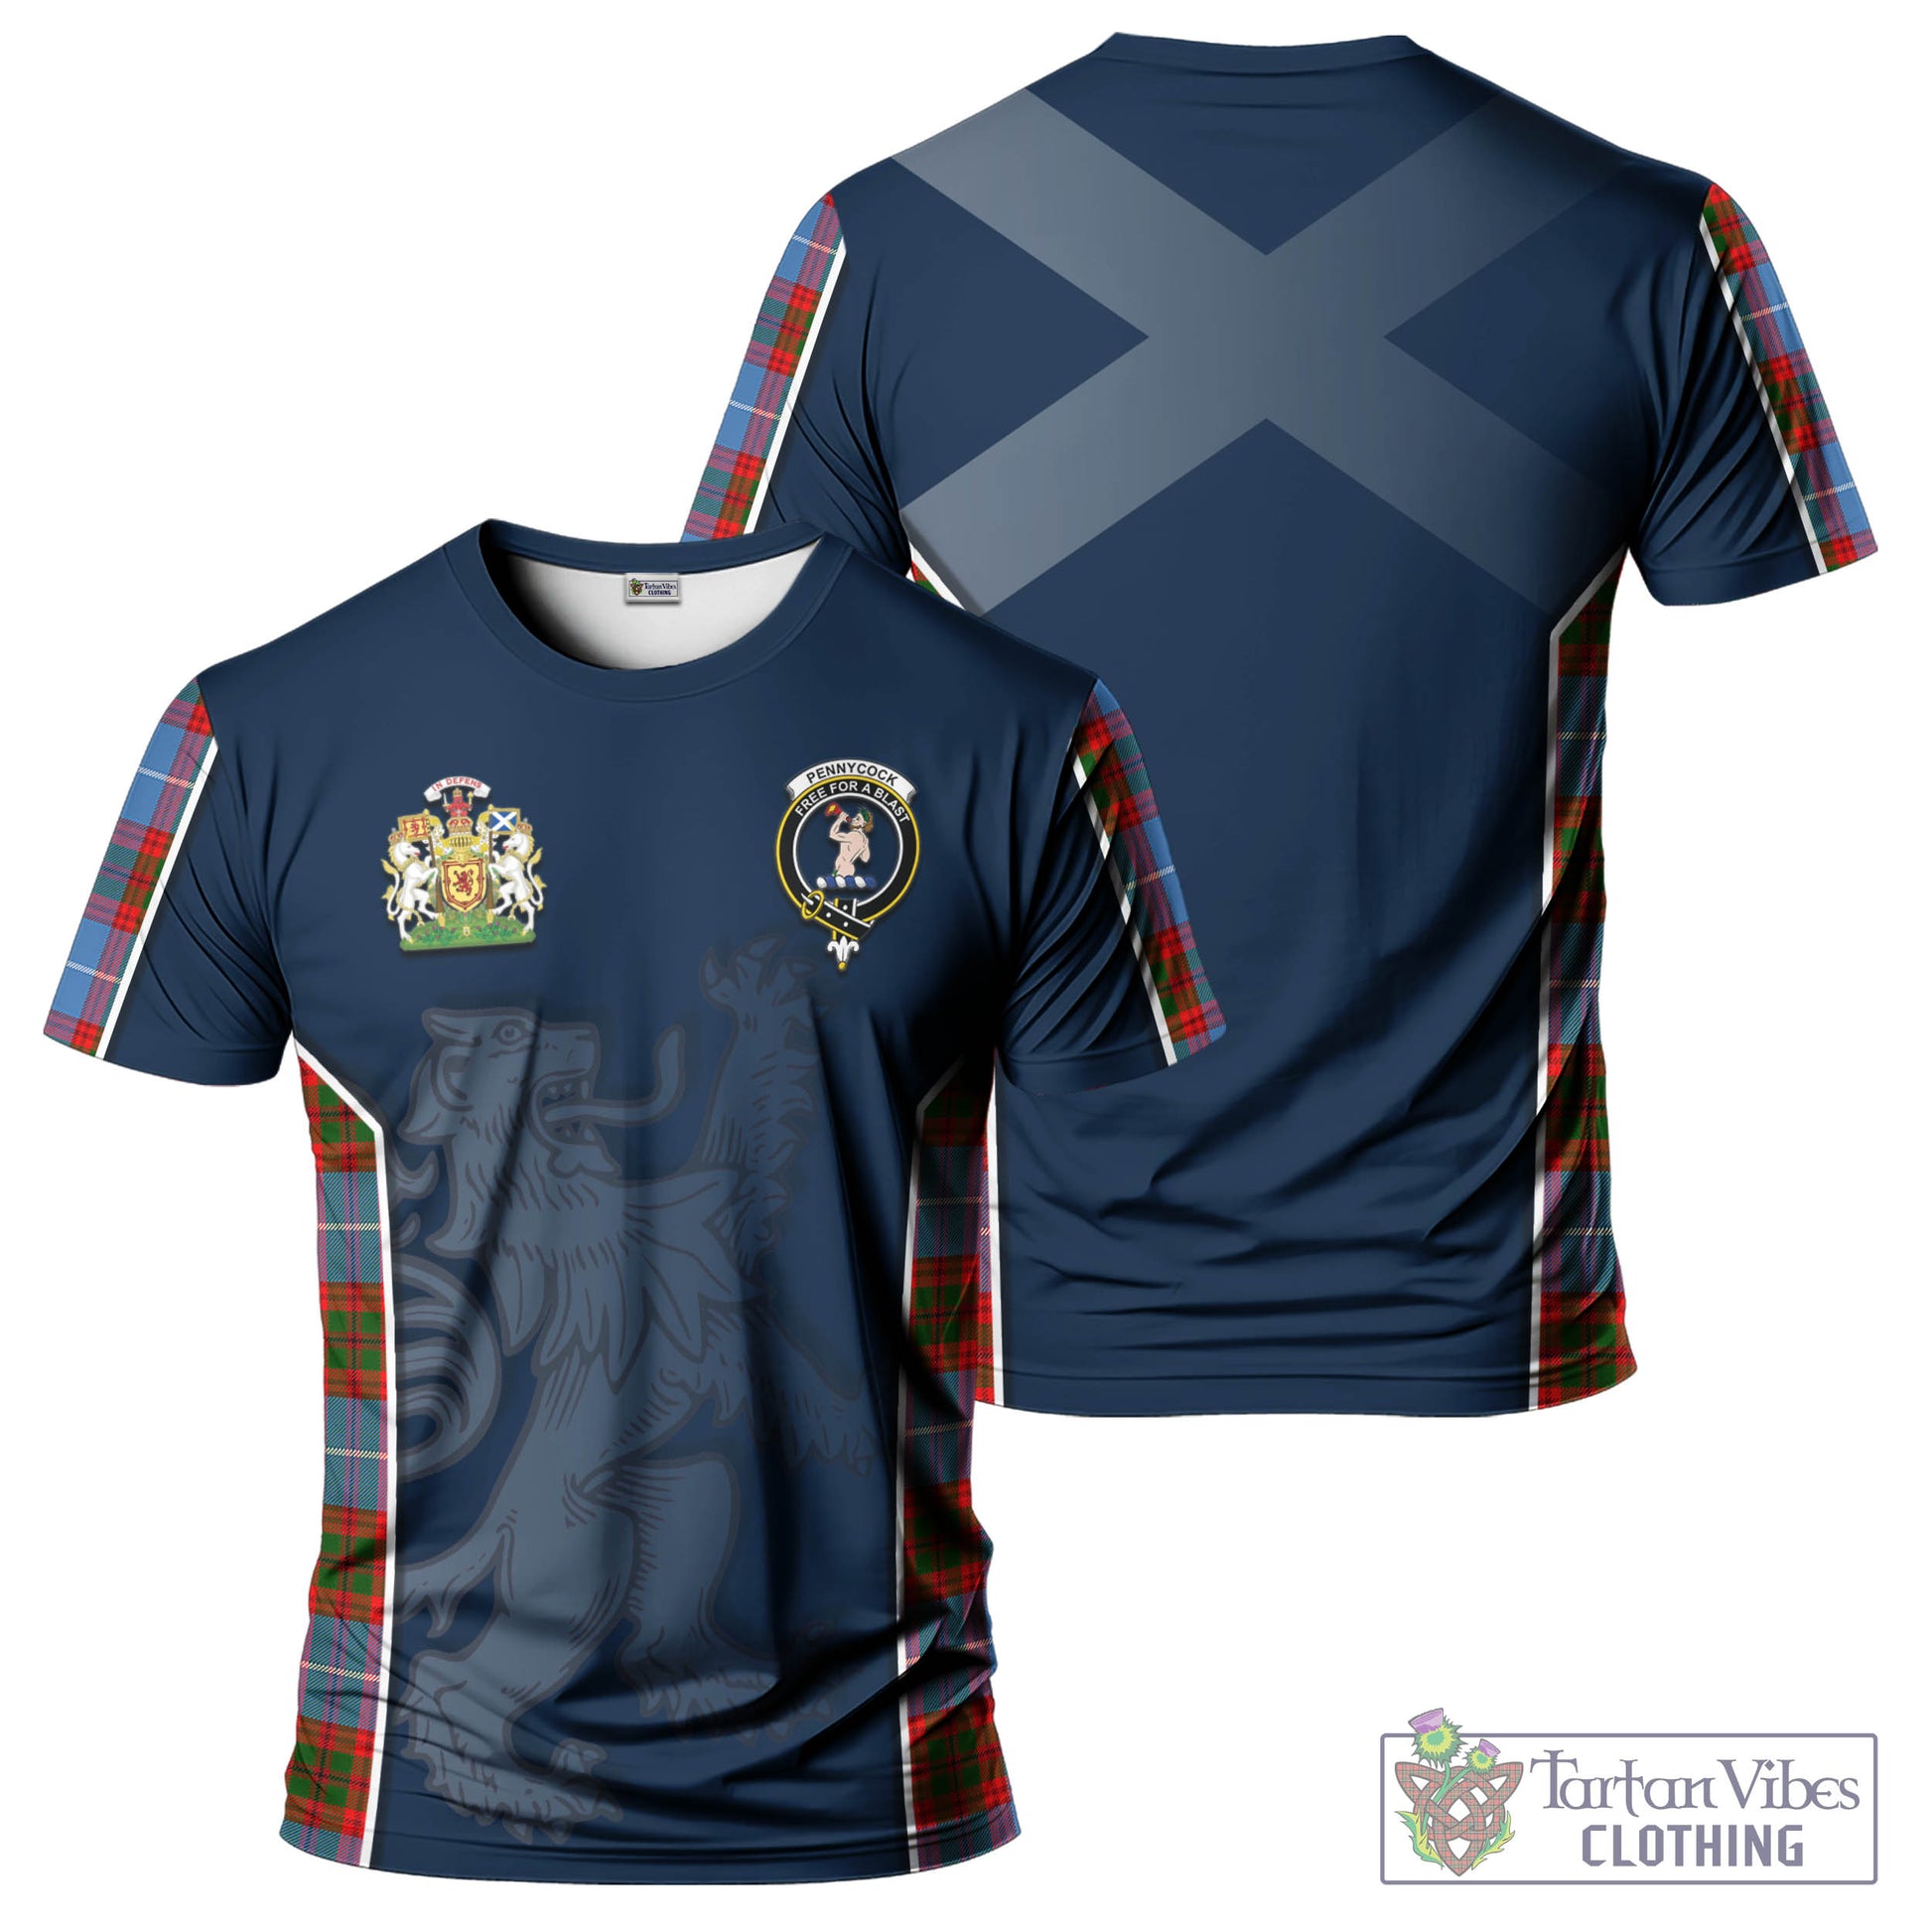 Tartan Vibes Clothing Pennycook Tartan T-Shirt with Family Crest and Lion Rampant Vibes Sport Style